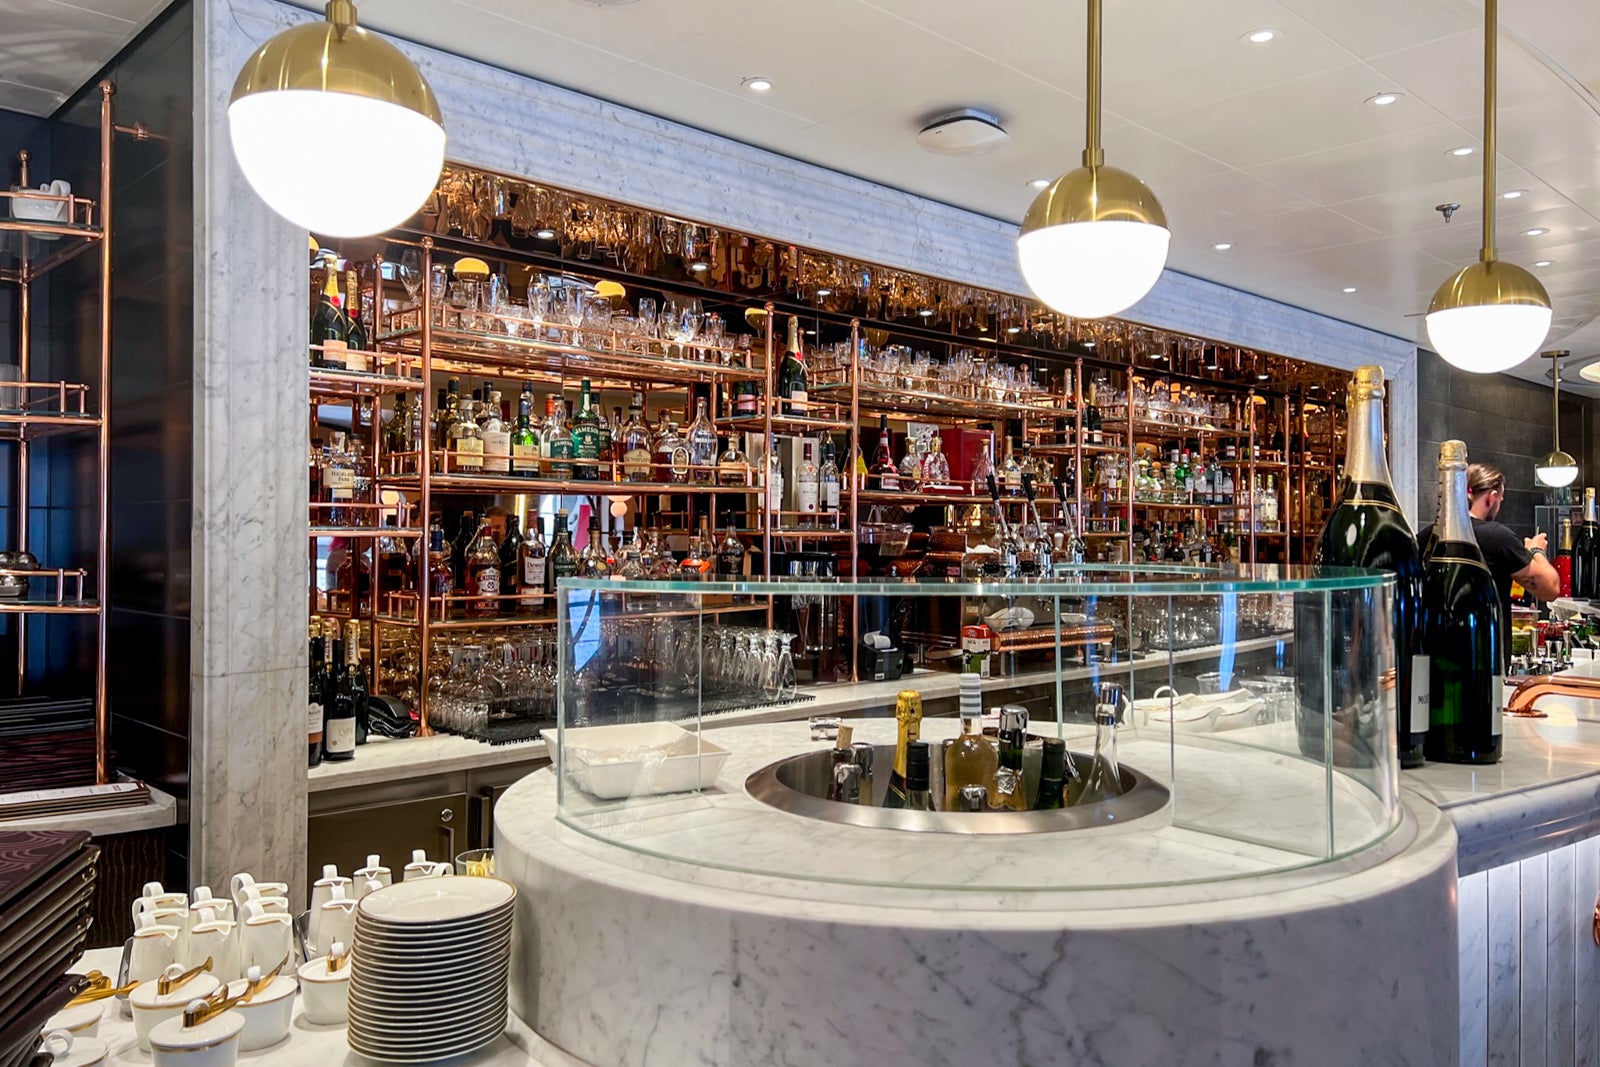 A rounded bar with a wall full of alcohol bottles behind it